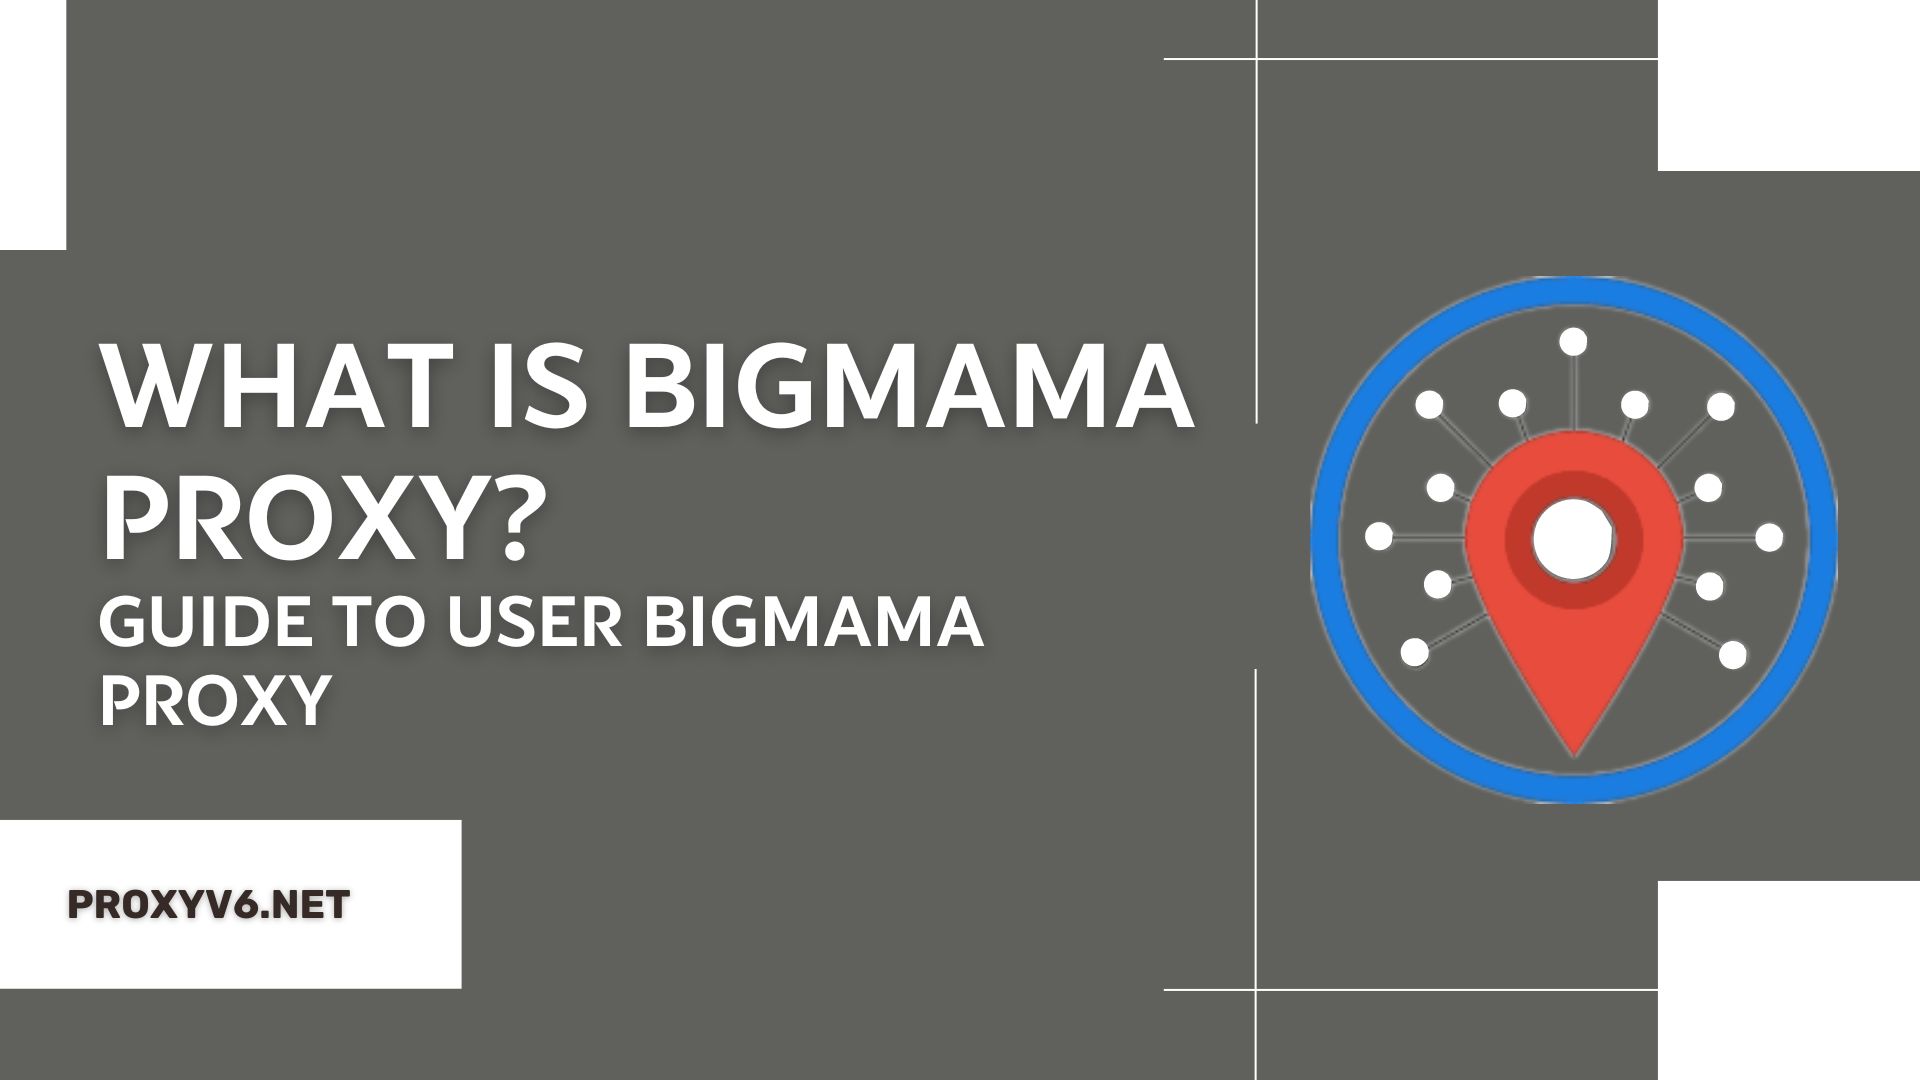 What is Bigmama Proxy? Guide to use Bigmama Proxy